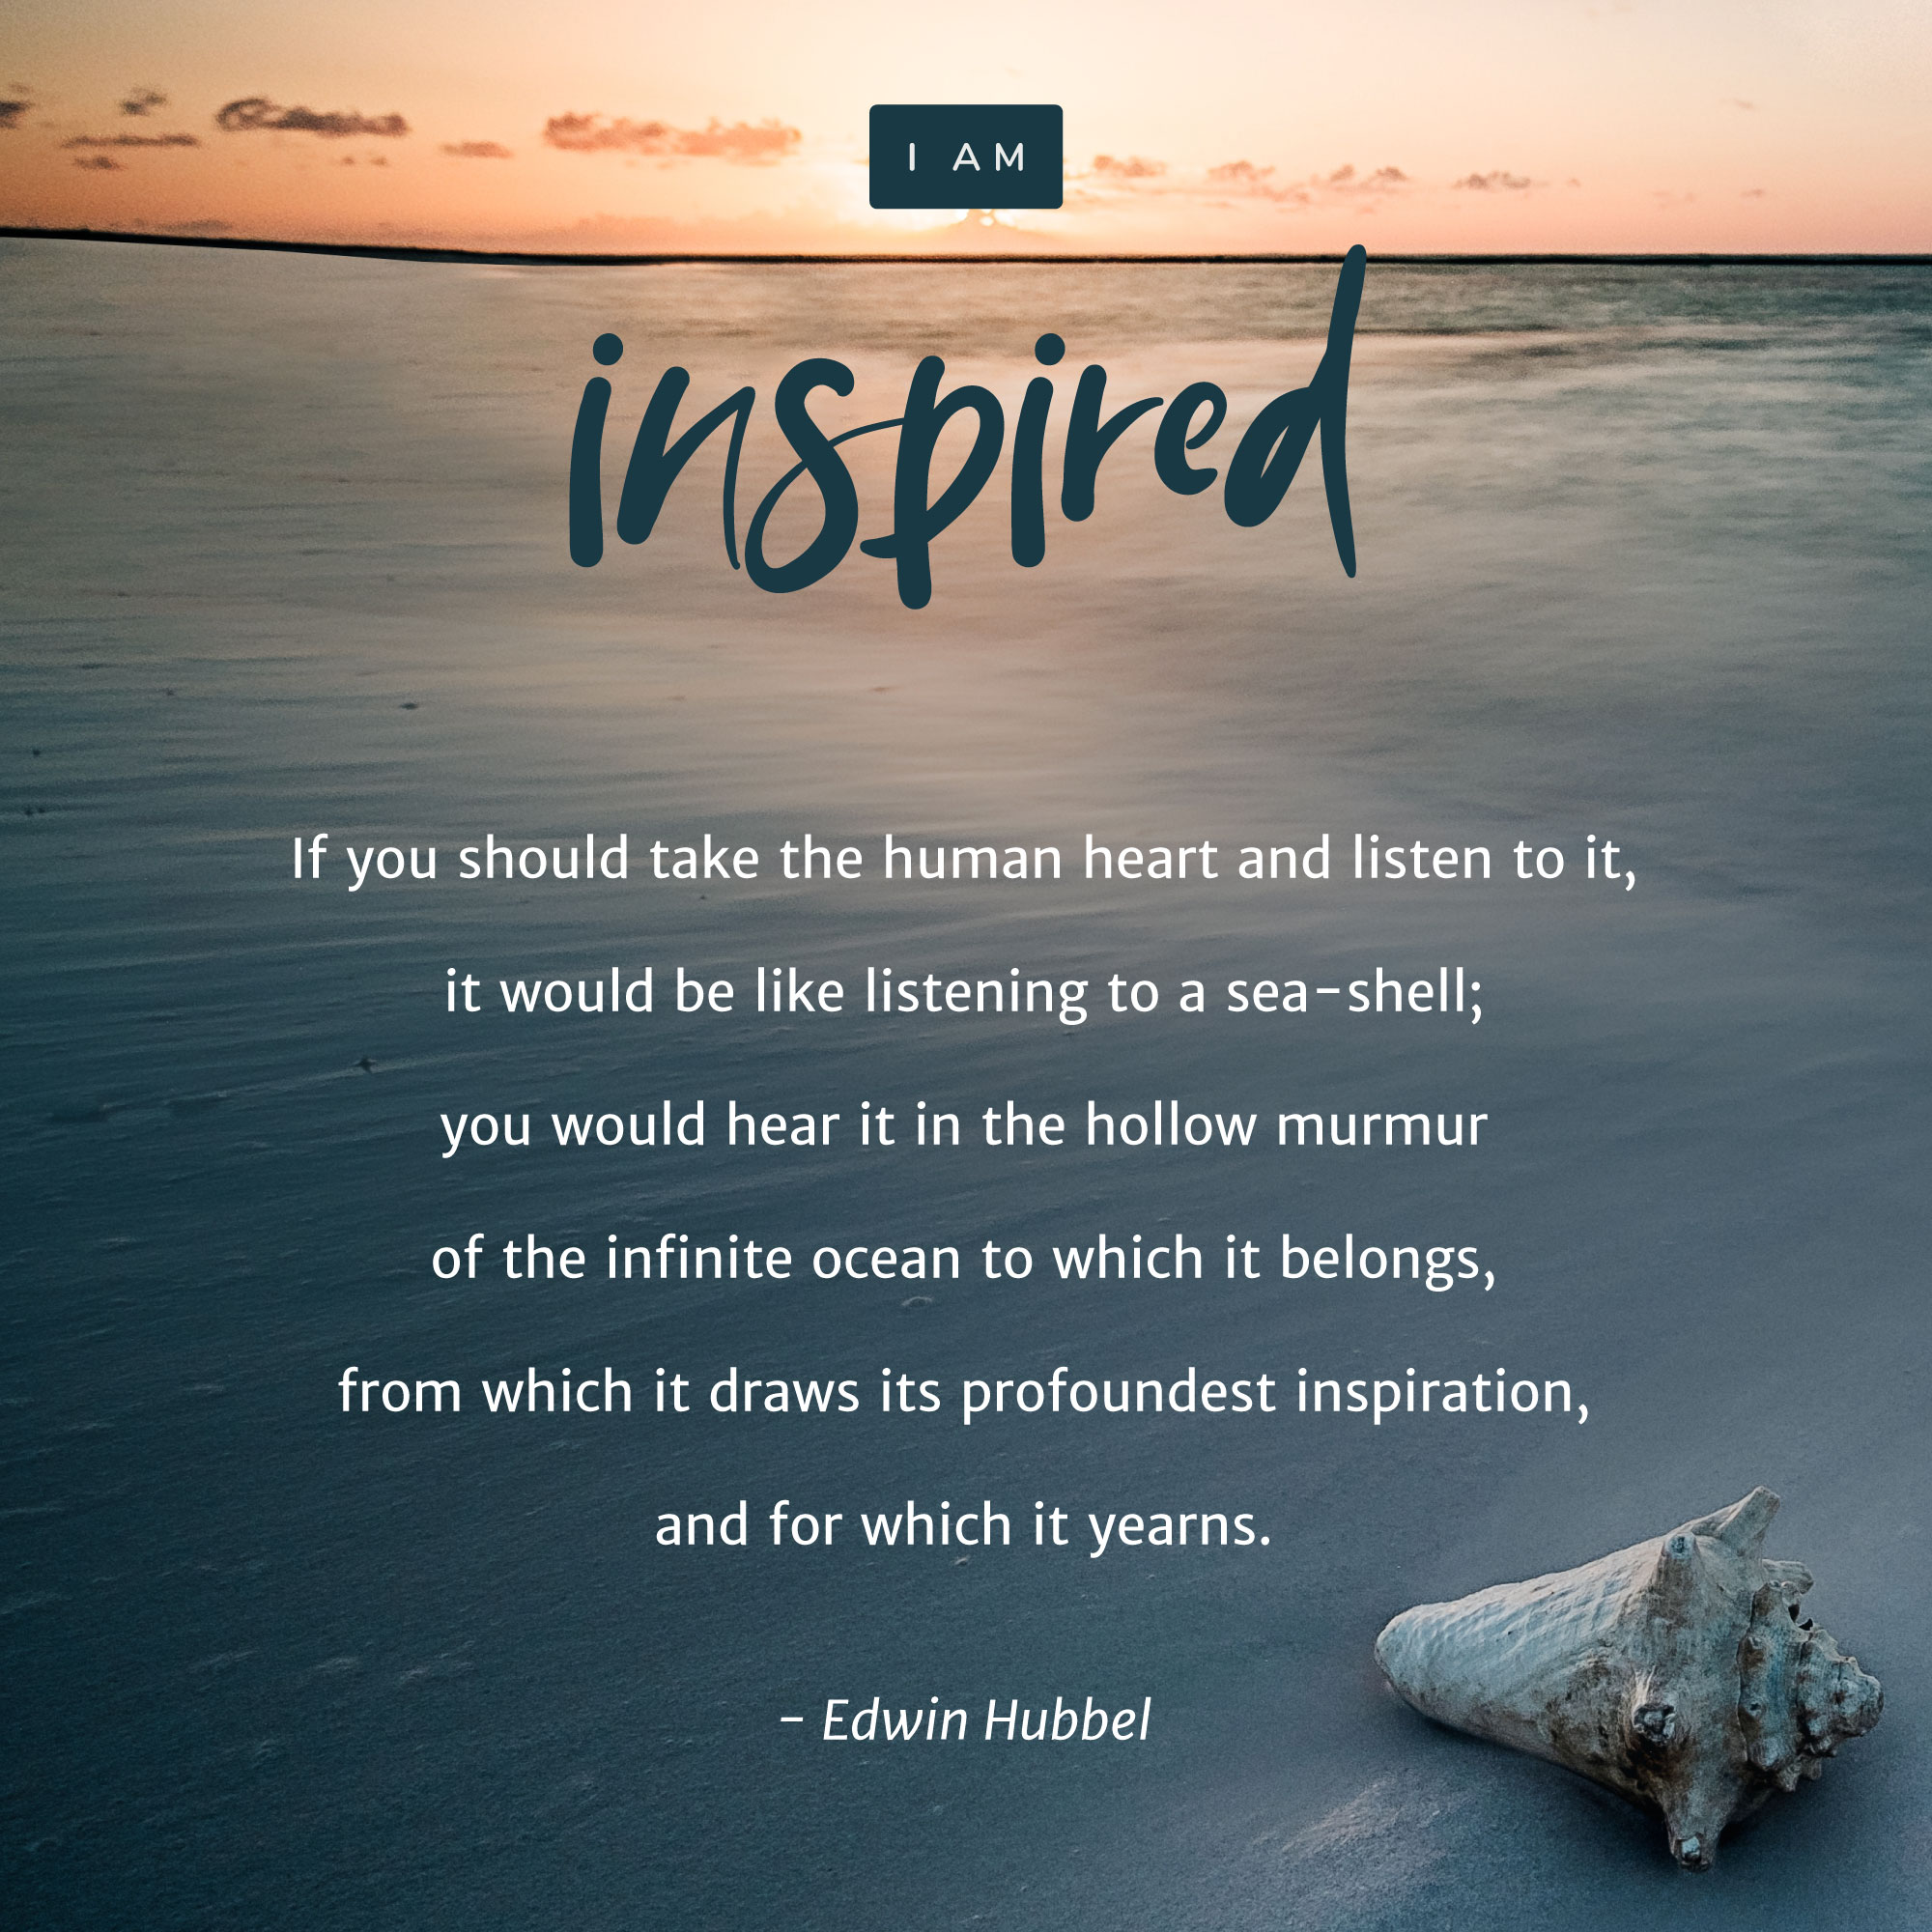 “If you should take the human heart and listen to it, it would be like listening to a sea-shell; you would hear it in the hollow murmur of the infinite ocean to which it belongs, from which it draws its profoundest inspiration, and for which it yearns.” – Edwin Hubbel